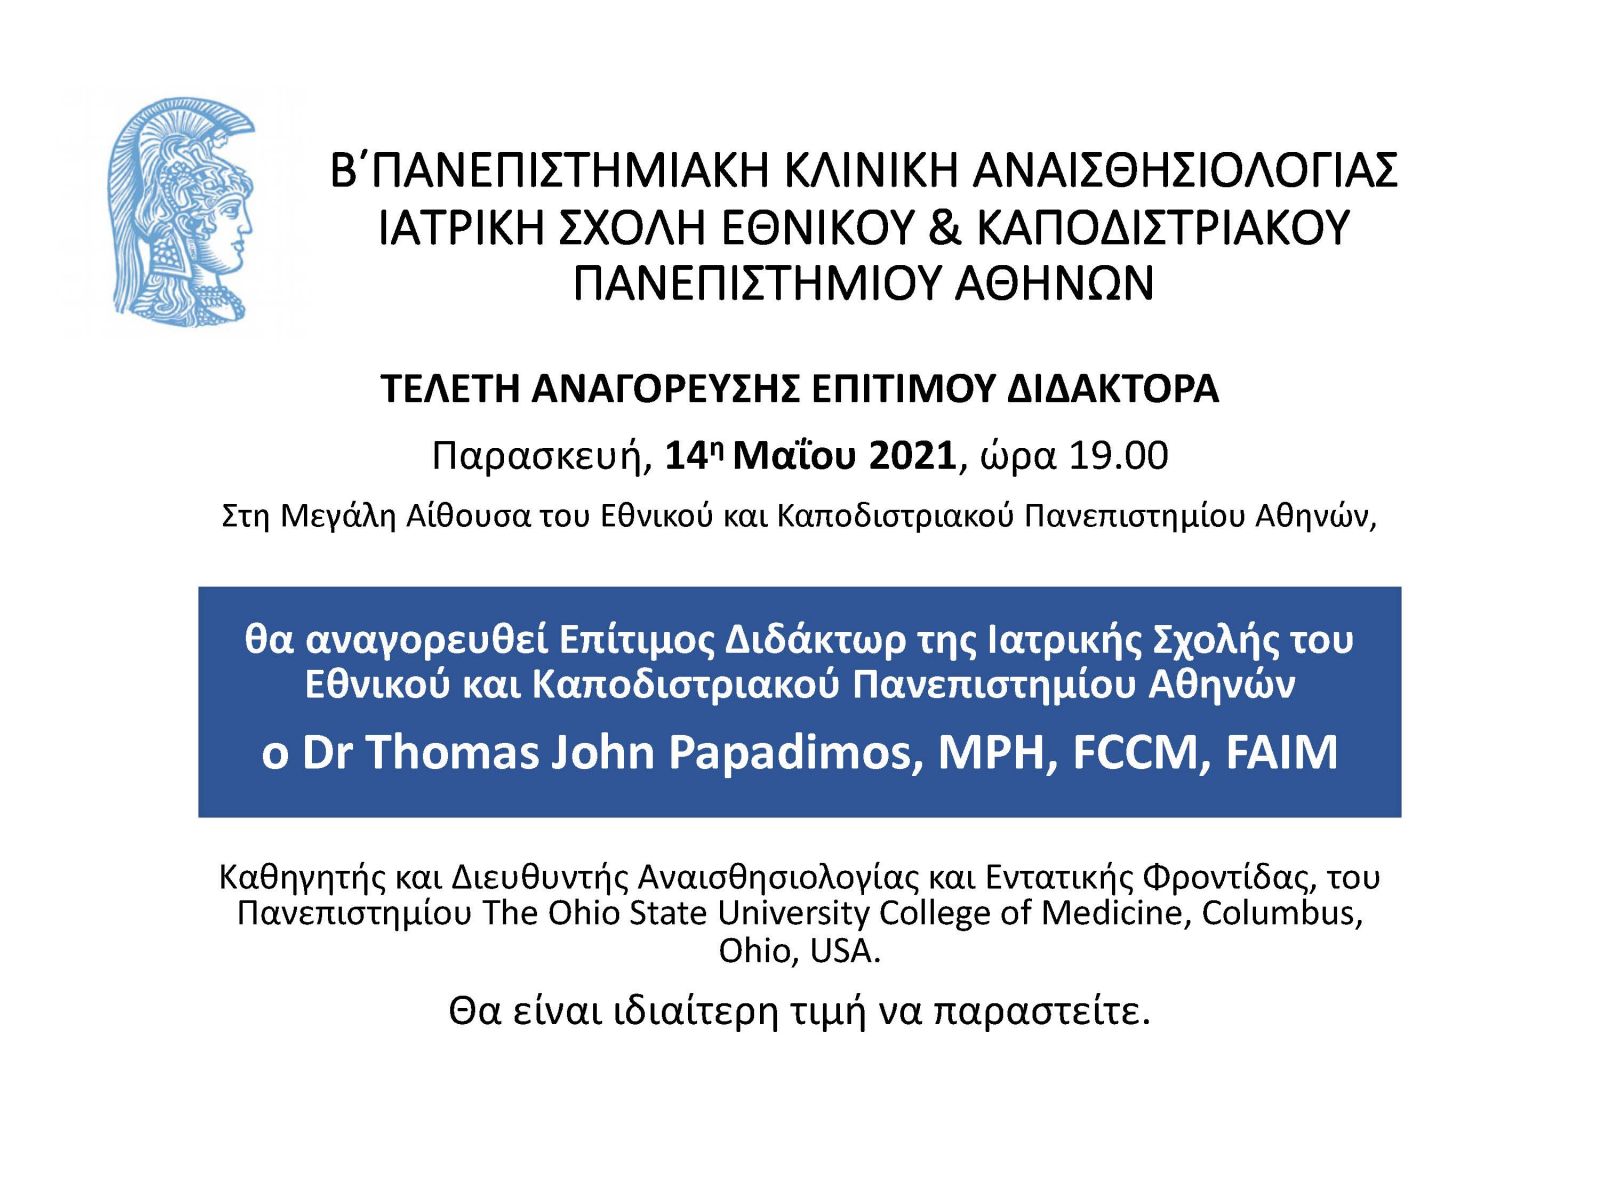 https://anaesthesiology.gr/media/Image/conferences/greek/2021/teleti2%20(1)_Page_1.jpg